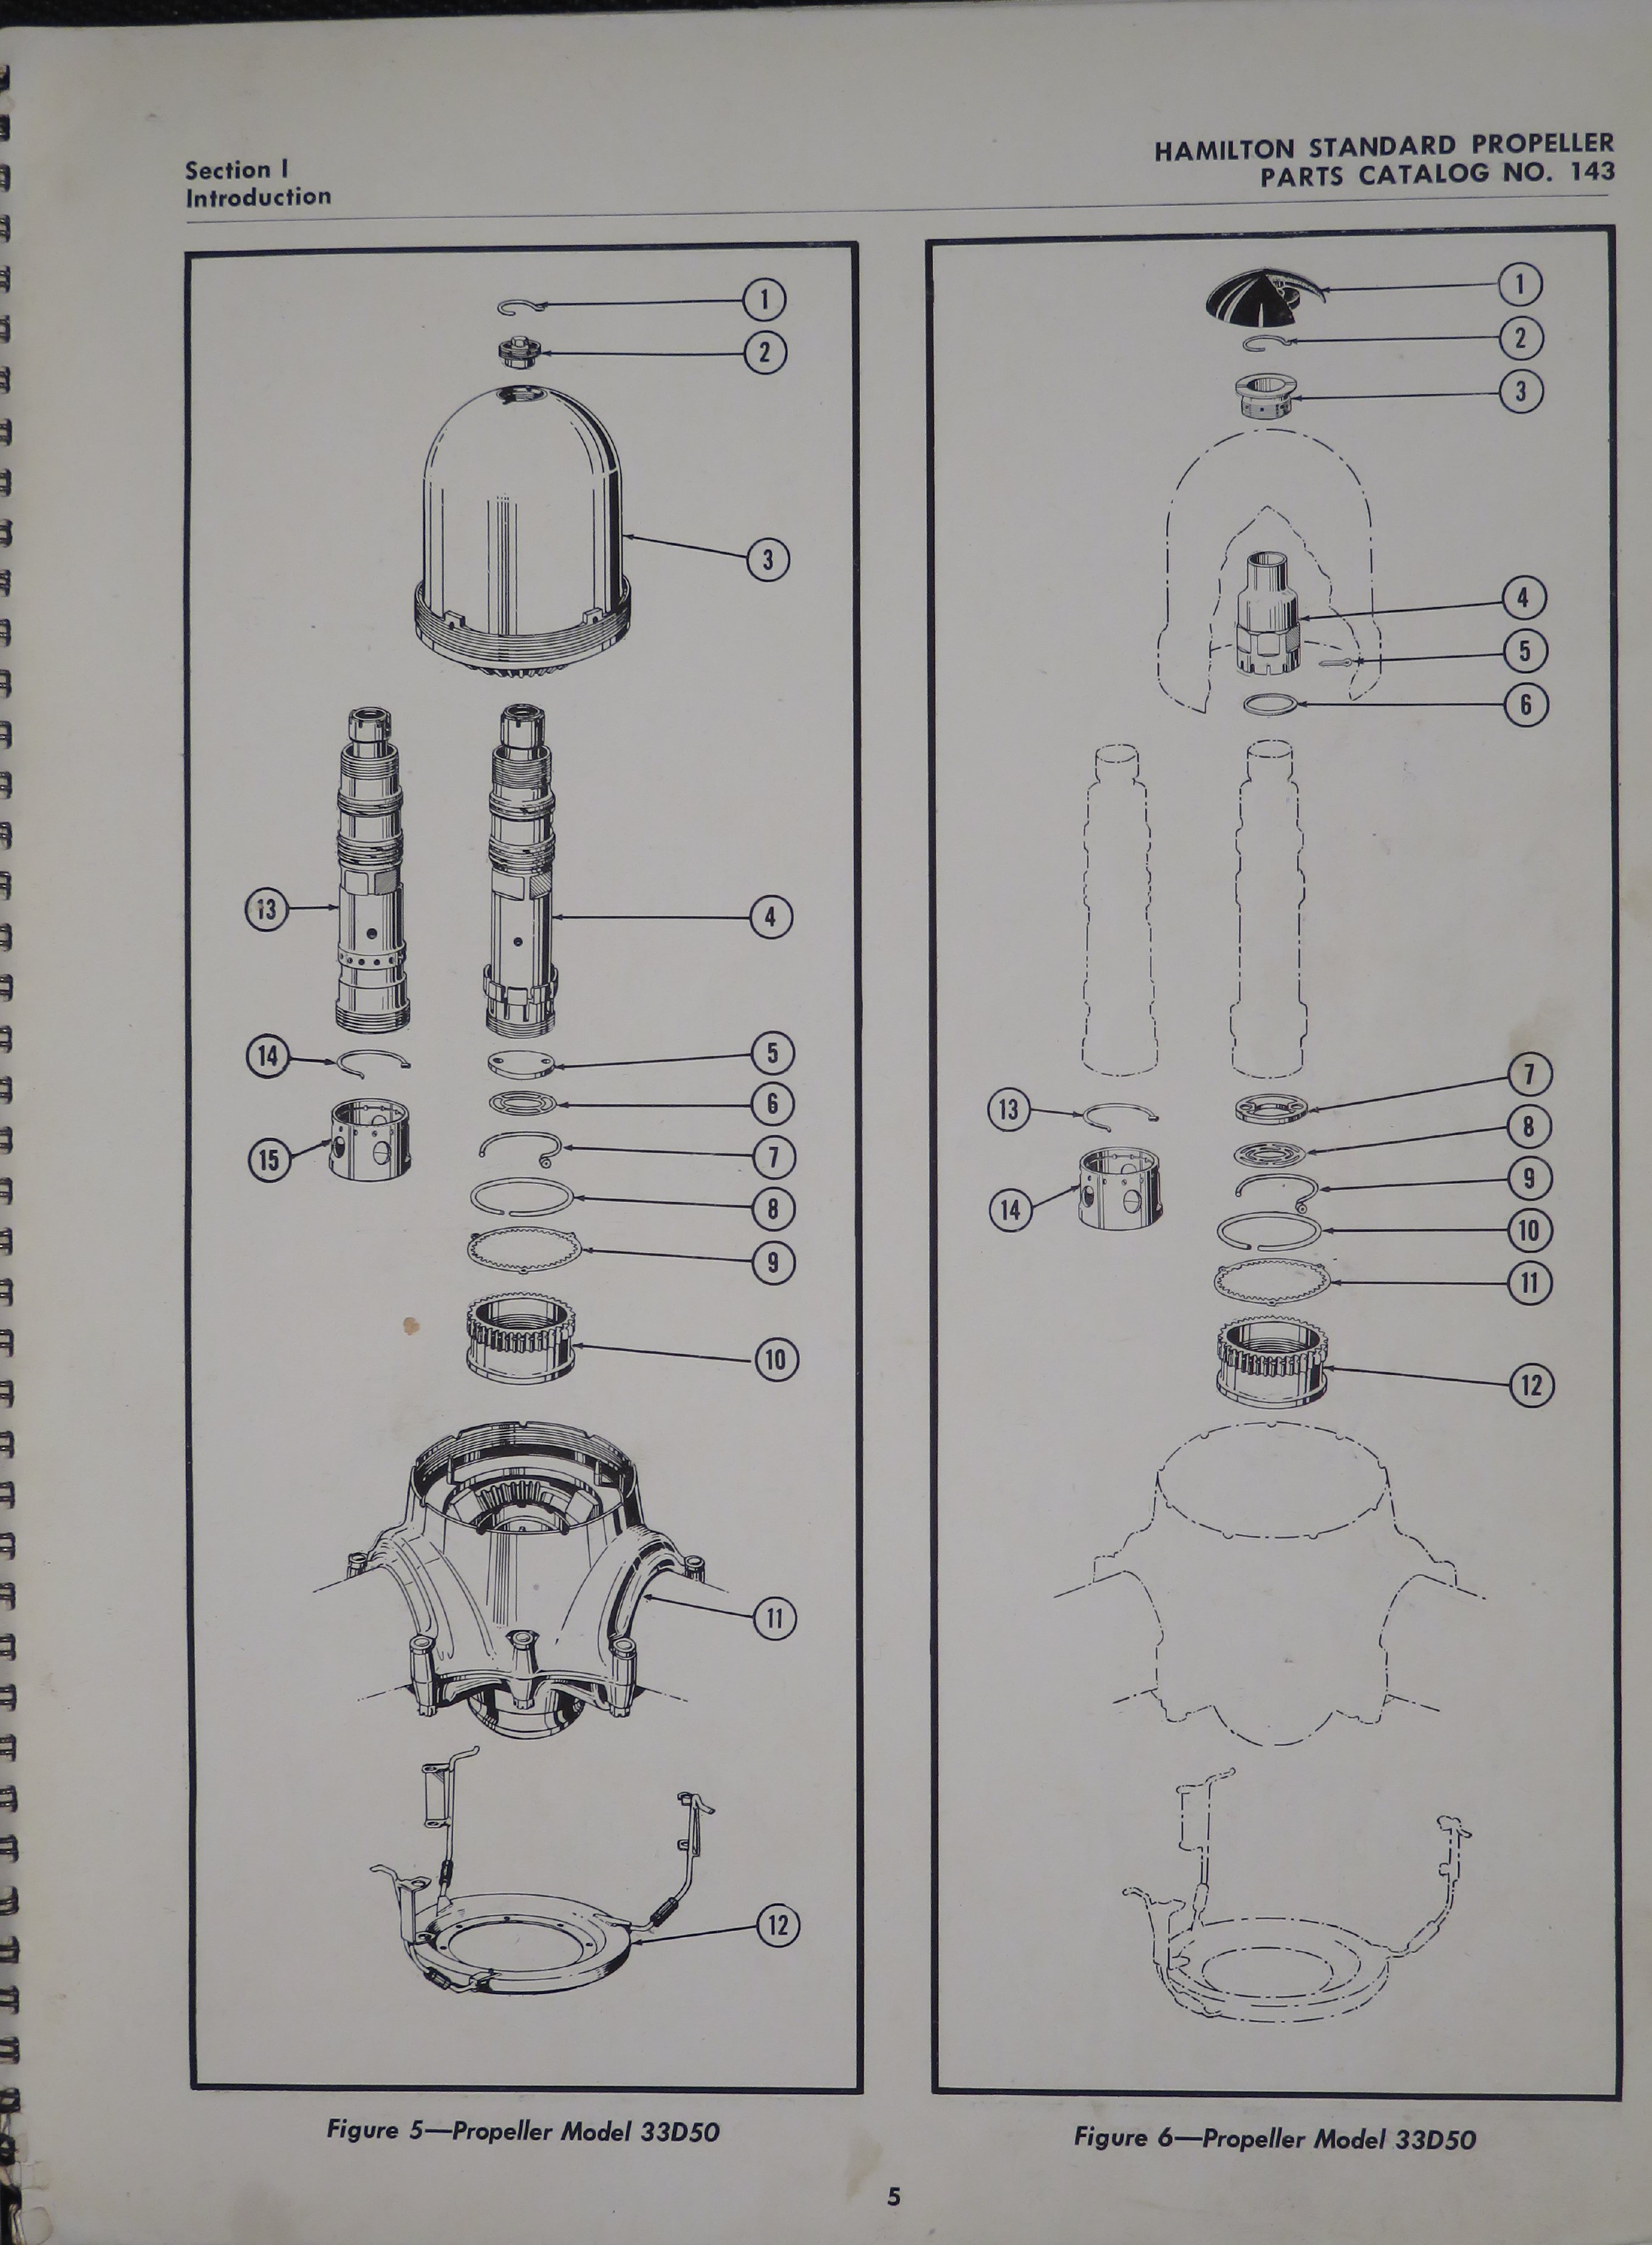 Sample page 7 from AirCorps Library document: Parts Catalog for Quick-Feathering Hydromatic Propellers